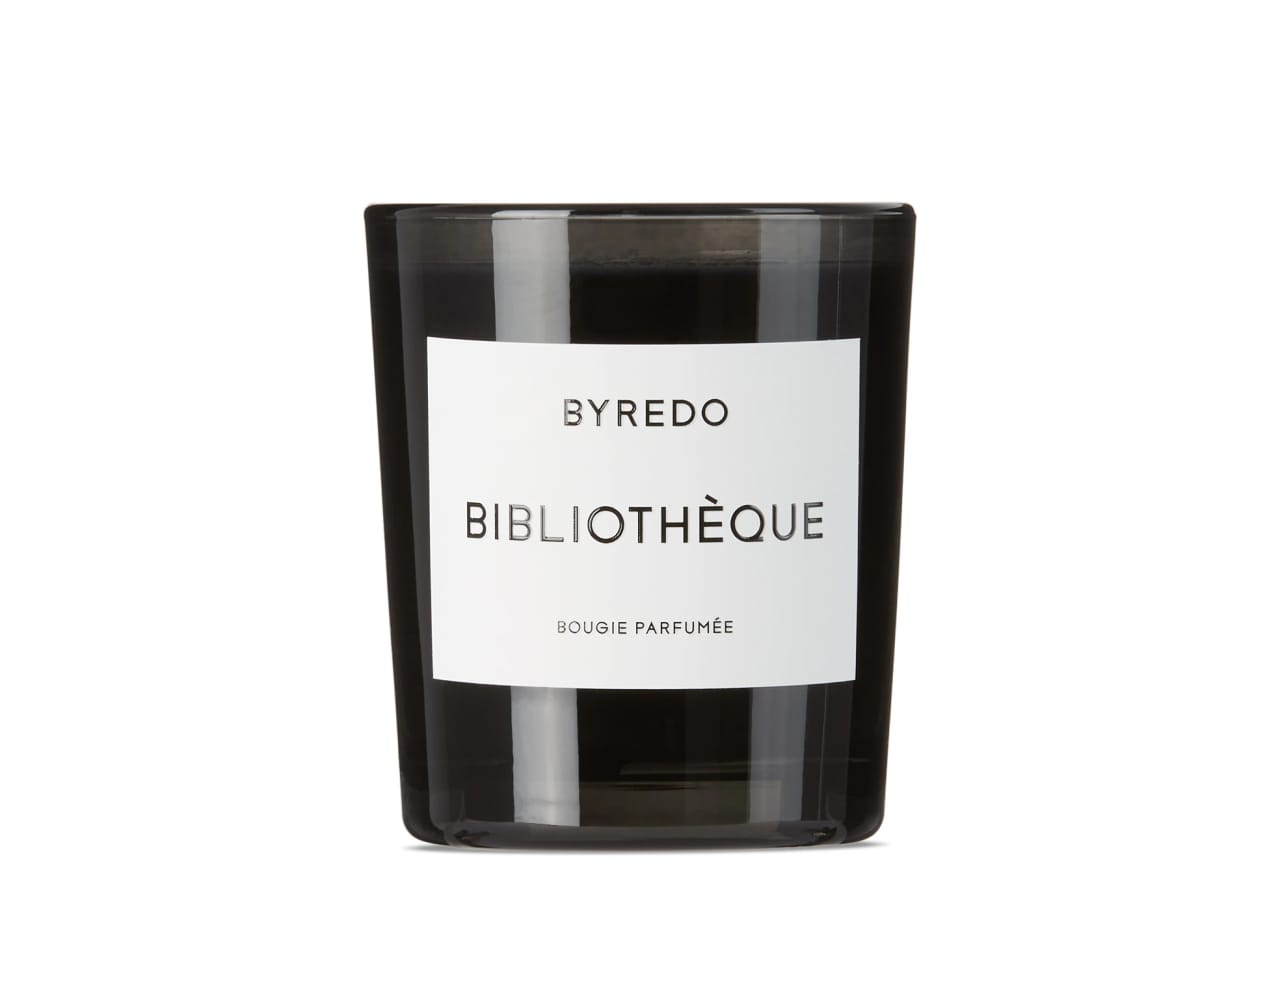 15 Best Home Fragrances to Make Any Room Smell Wonderful - Buy